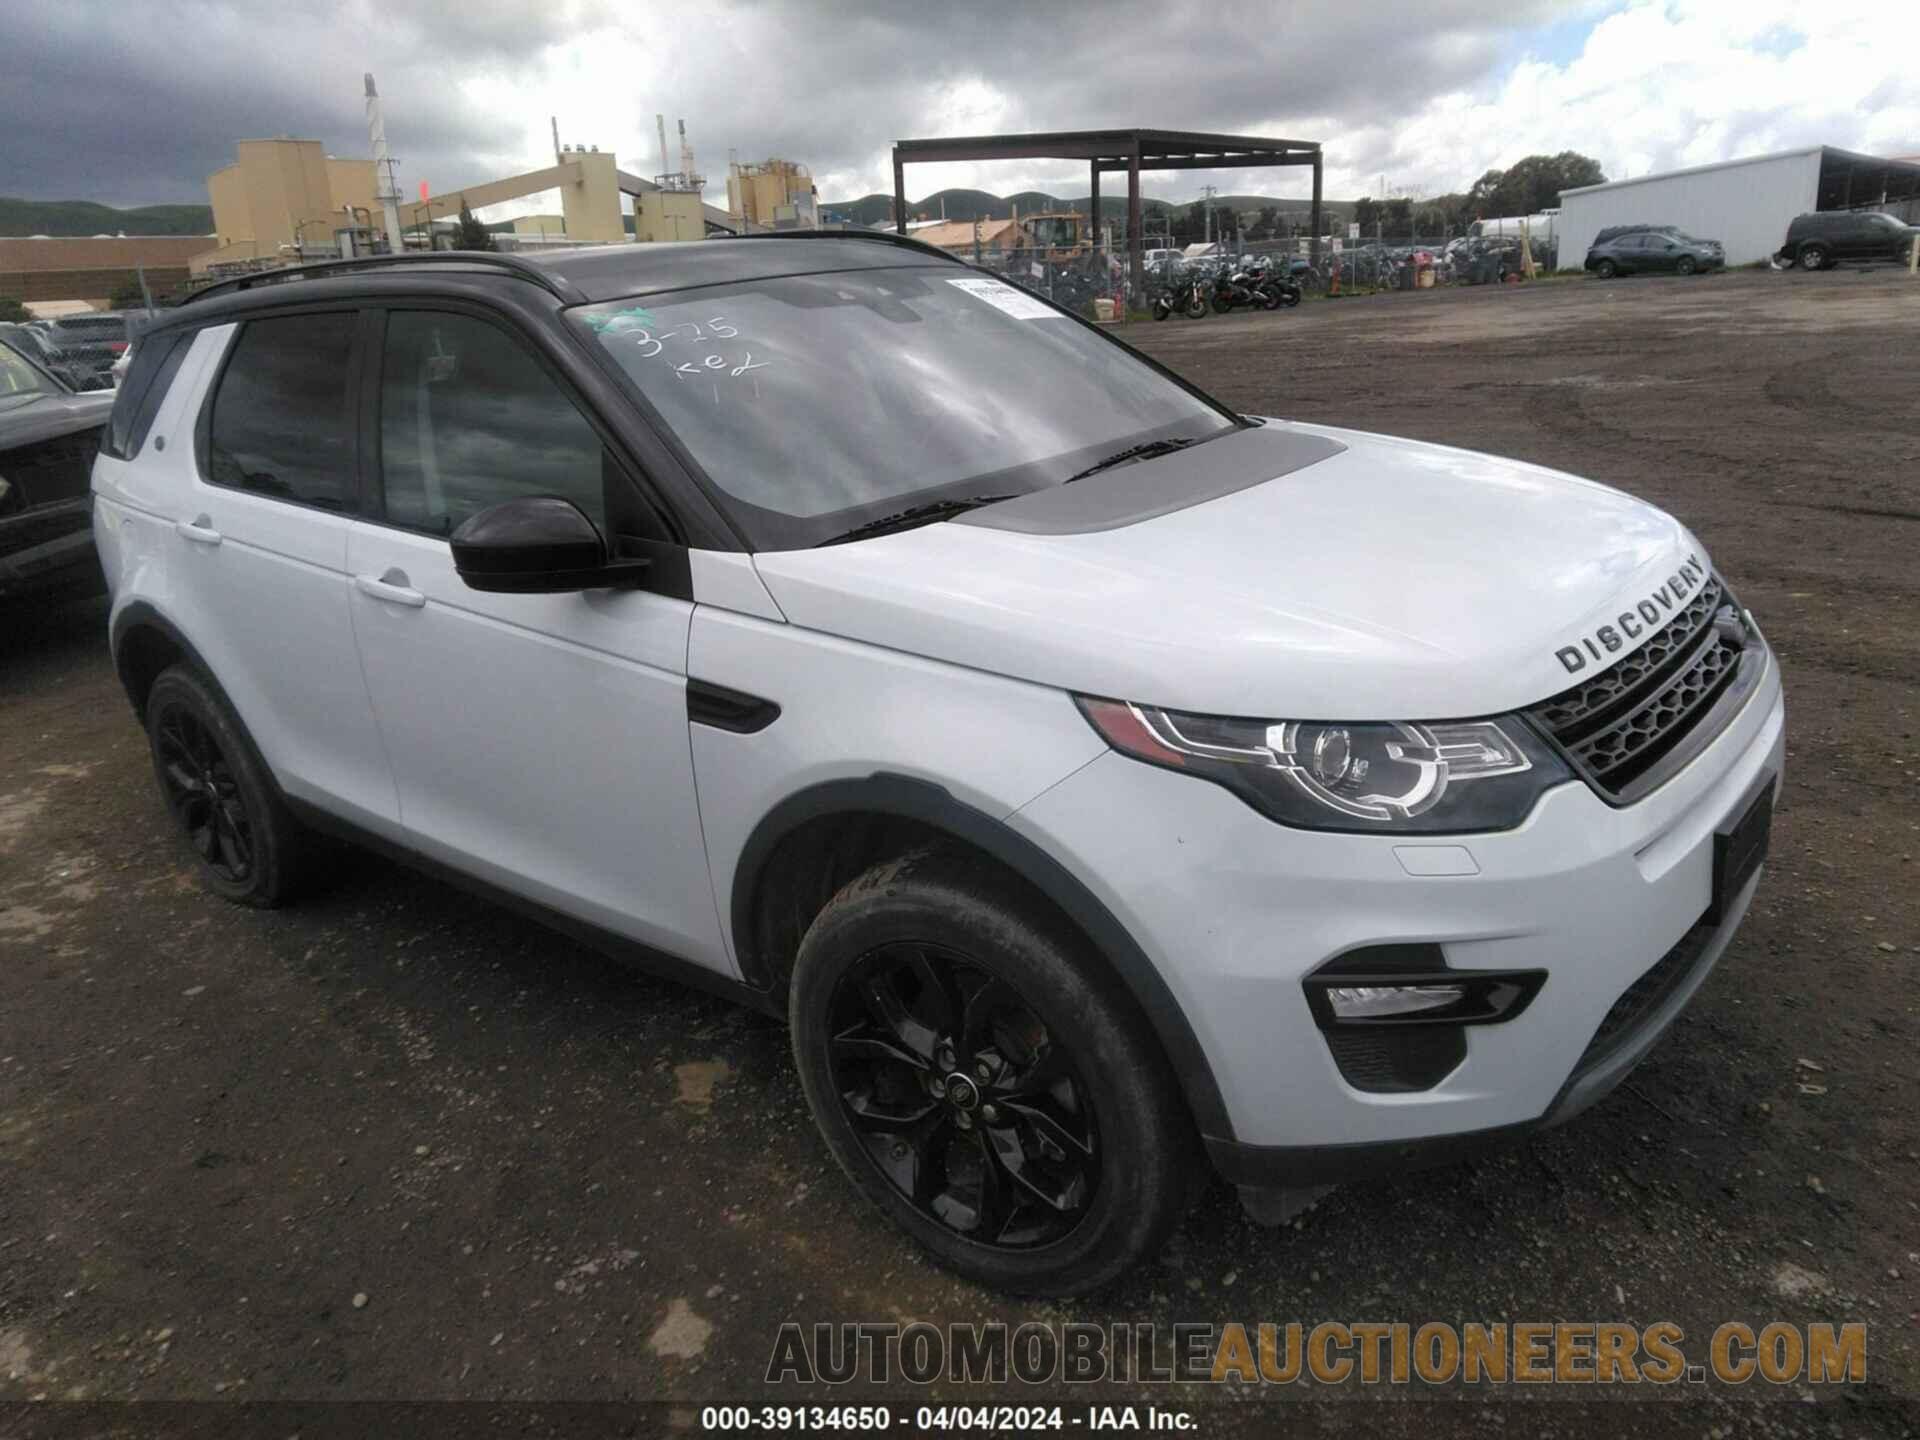 SALCT2BG3HH712468 LAND ROVER DISCOVERY SPORT 2017